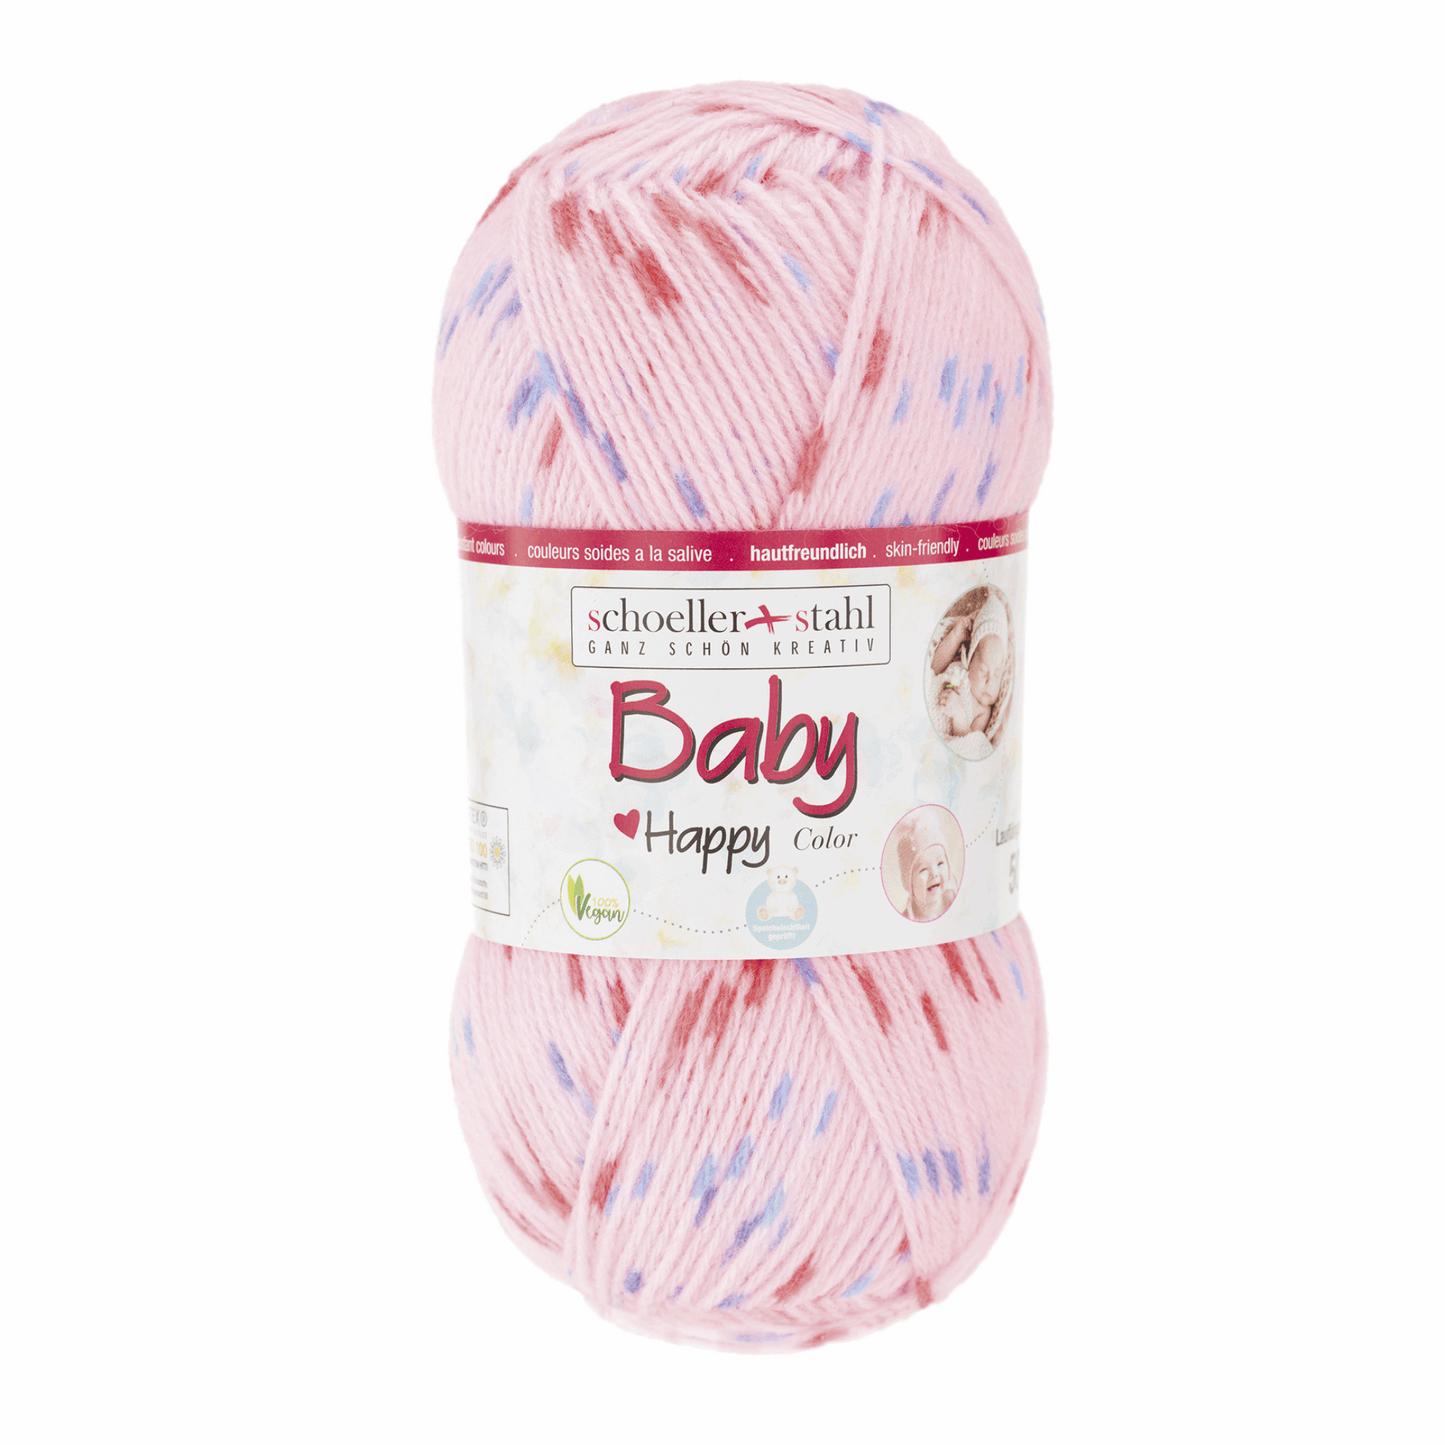 Baby happy color 50g, 90280, color 114, blossom